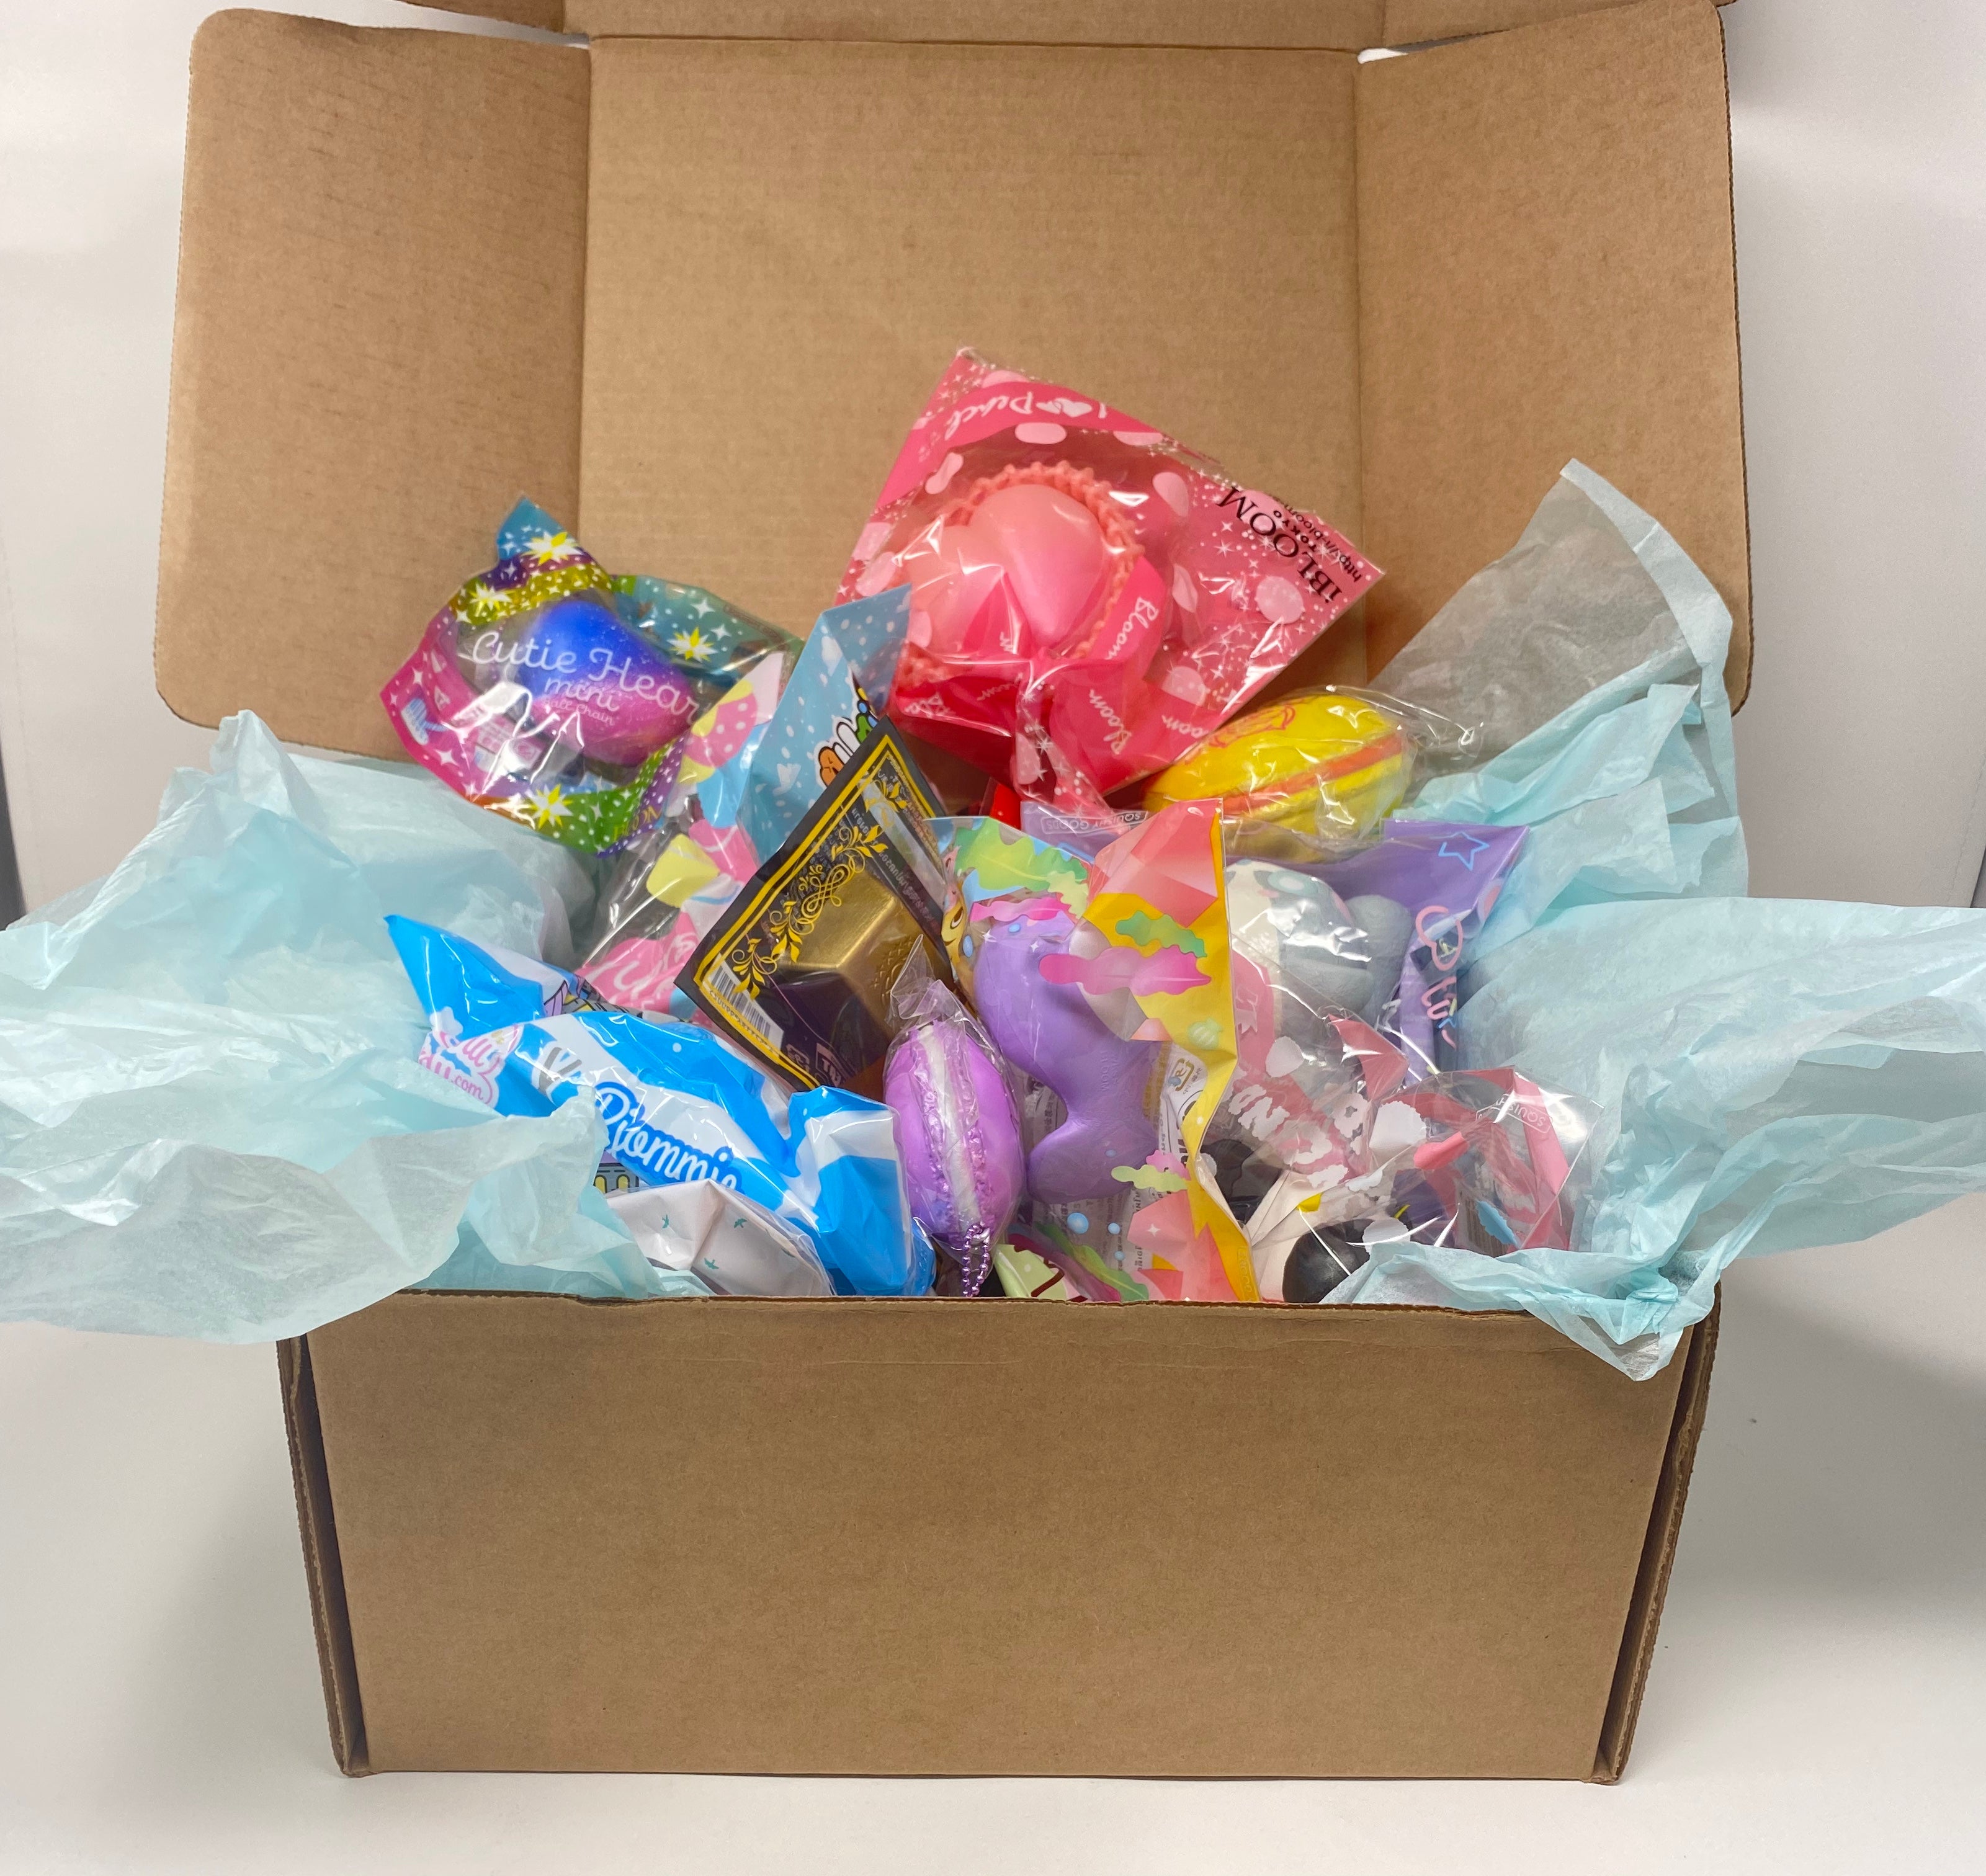 Rare licensed squishies supplier package for sale: grab bag of 10 squishies  for 55 usd!